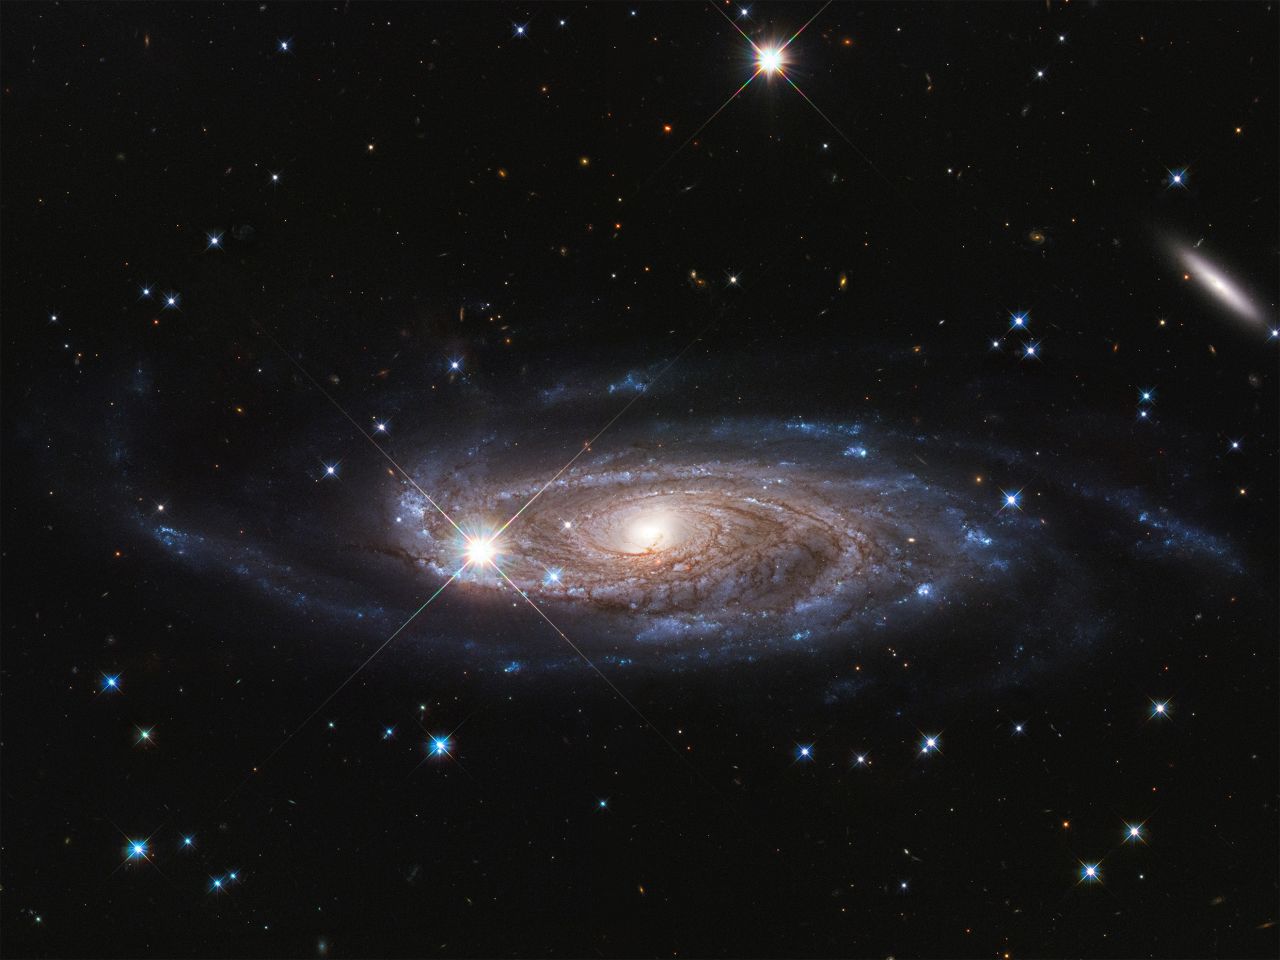 Galaxy UGC 2885, nicknamed the "Godzilla galaxy," may be the largest one in the local universe.